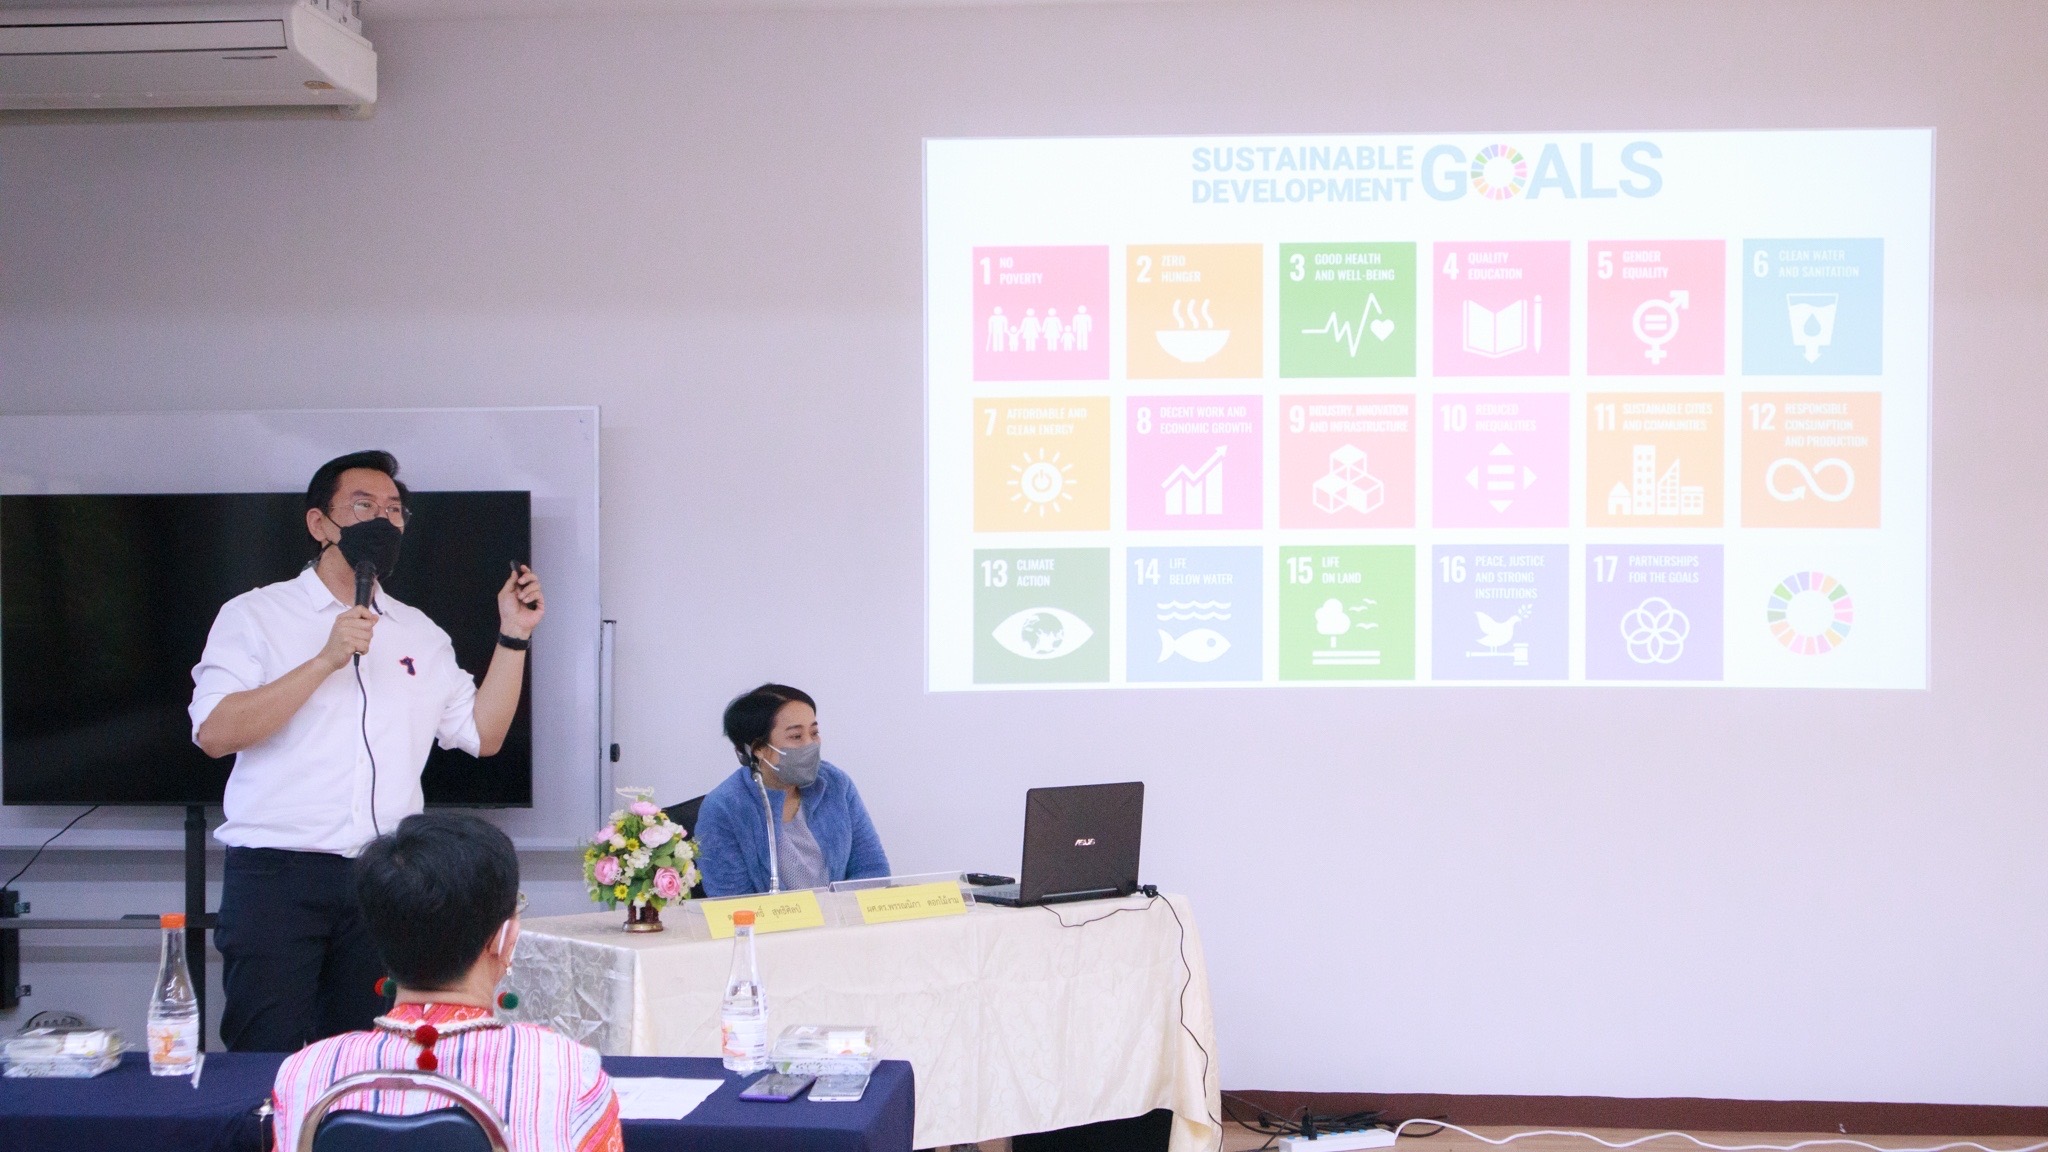 Asst. Prof. Dr. Pannipha Dokmaingam and Dr. Noppharit Sutthasil participated in “Sustainable Development Goals (SDGs)” 